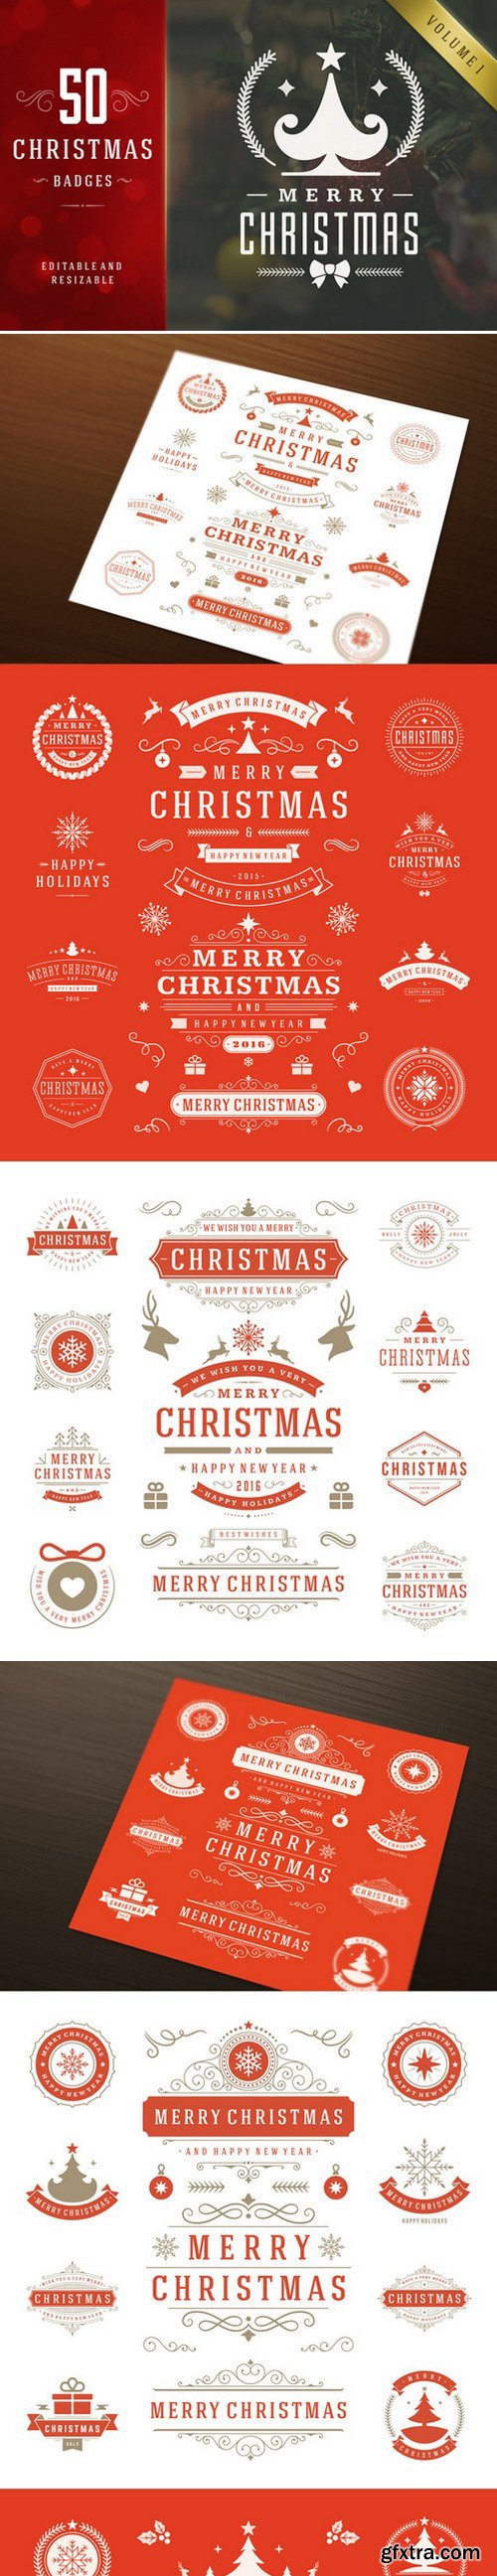 CM - 50 Christmas labels and badges 411111